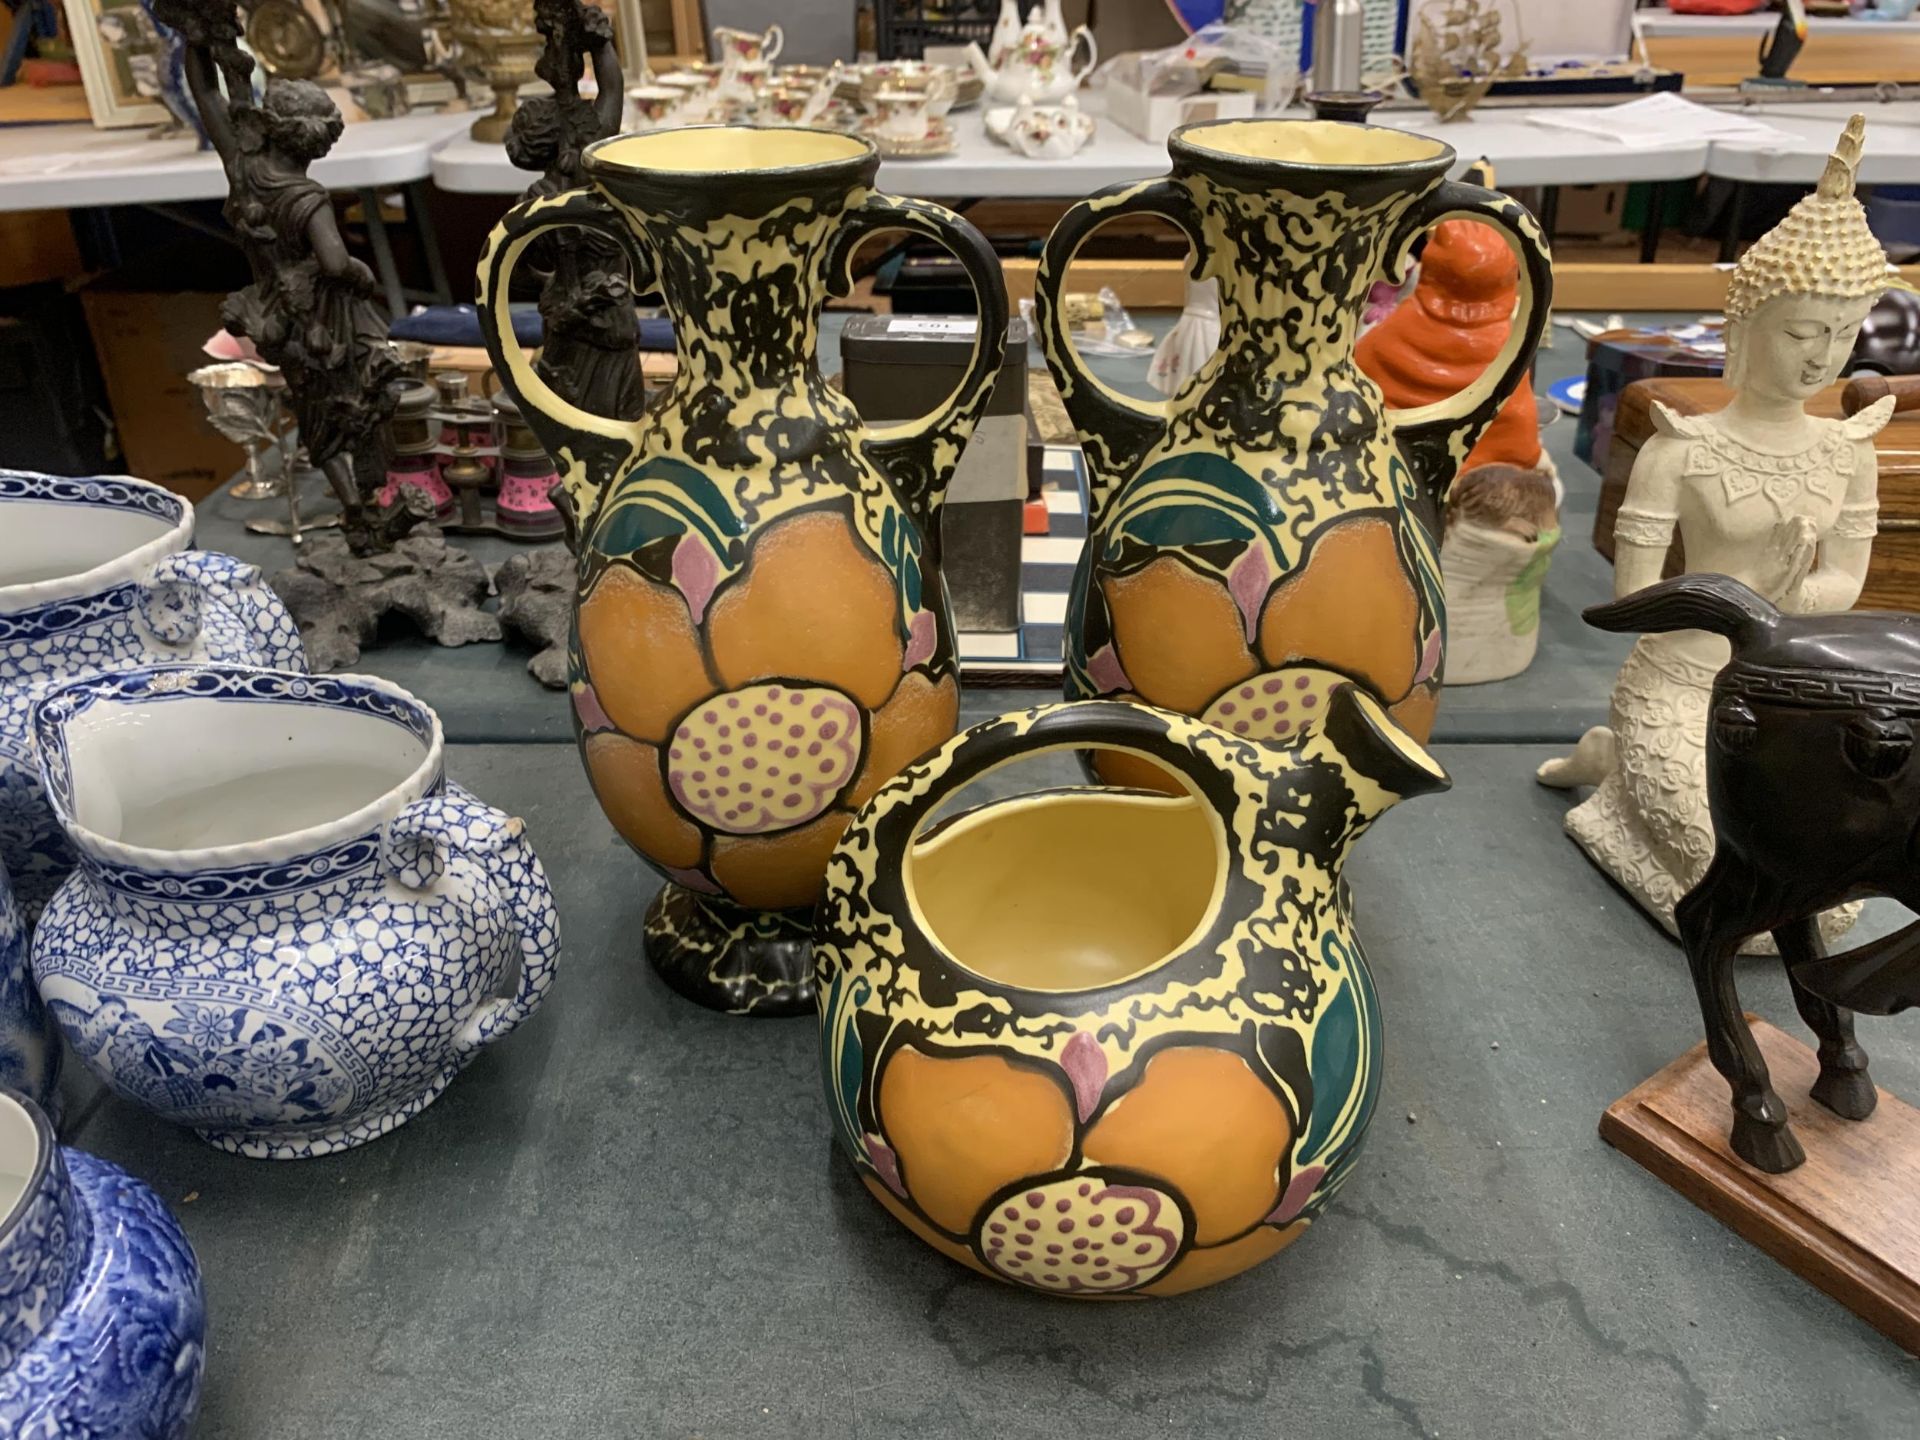 THREE PIECES OF STUDIO POTTERY TO INCLUDE A PAIR OF VASES AND A JUG WITH VIBRANT FLORAL DESIGN